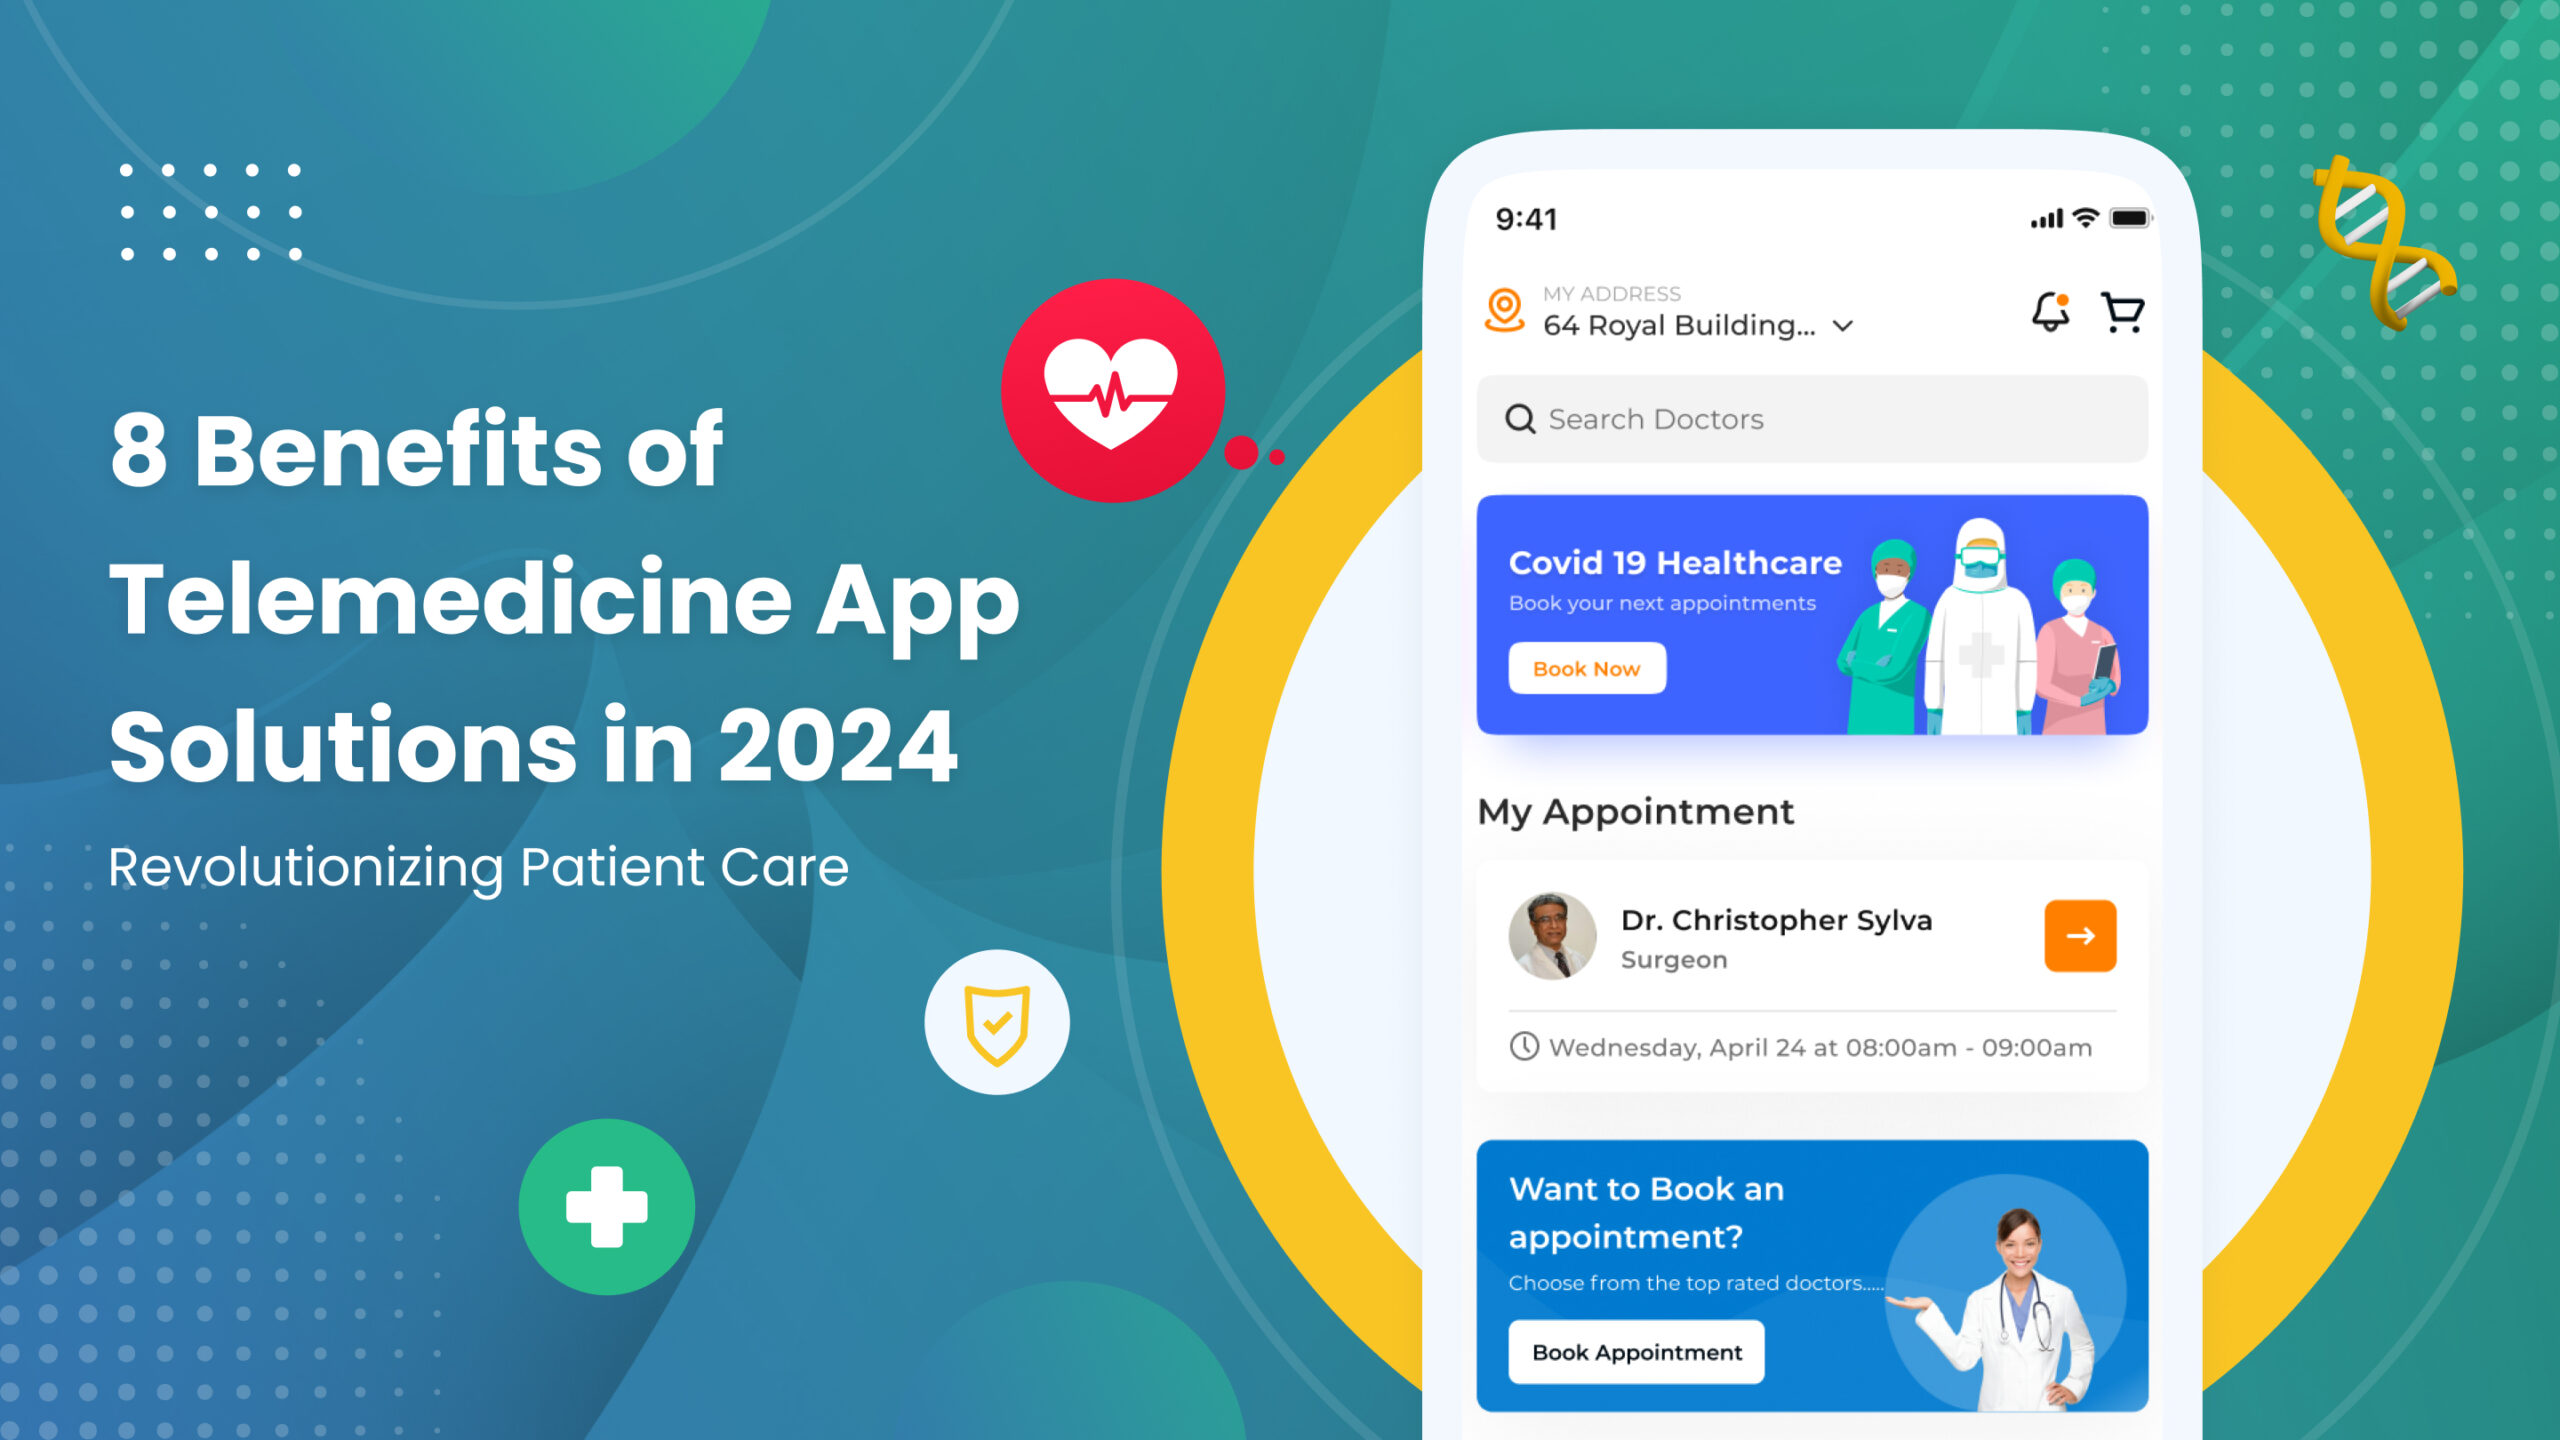 This Image contains the heading "8 Benefits of Telemedicine App Solutions in 2024: Revolutionizing Patient Care" and a mobile screen on the right side containing doctors and a booking module. The image is designed by Apponward Technologies.